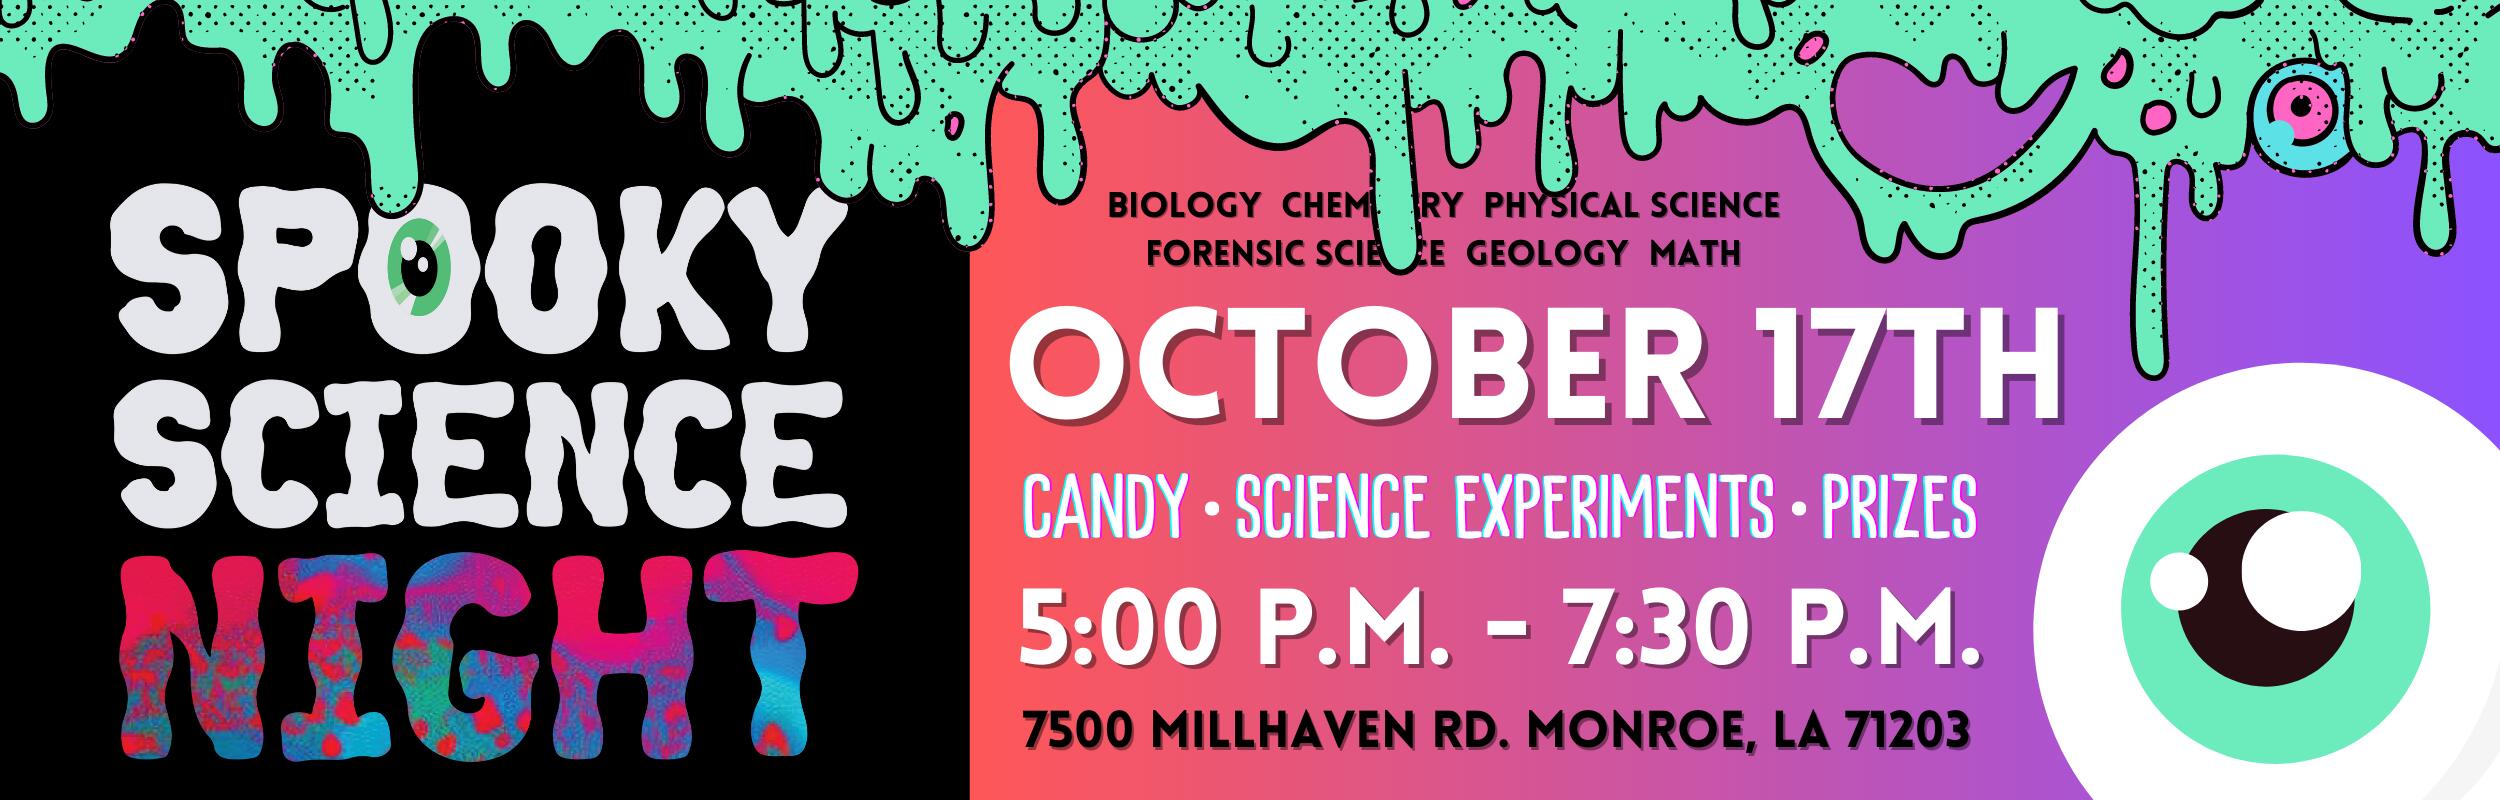 Spooky Science Night. Biology, Chemistry, Physical Science, Forensic Science, Geology, and Math. Candy, Science Experients, and Prizes. 5:00 P.M. to 7:30 P.M., October 17th at 7500 Millhaven Road Monroe, LA, 71203.